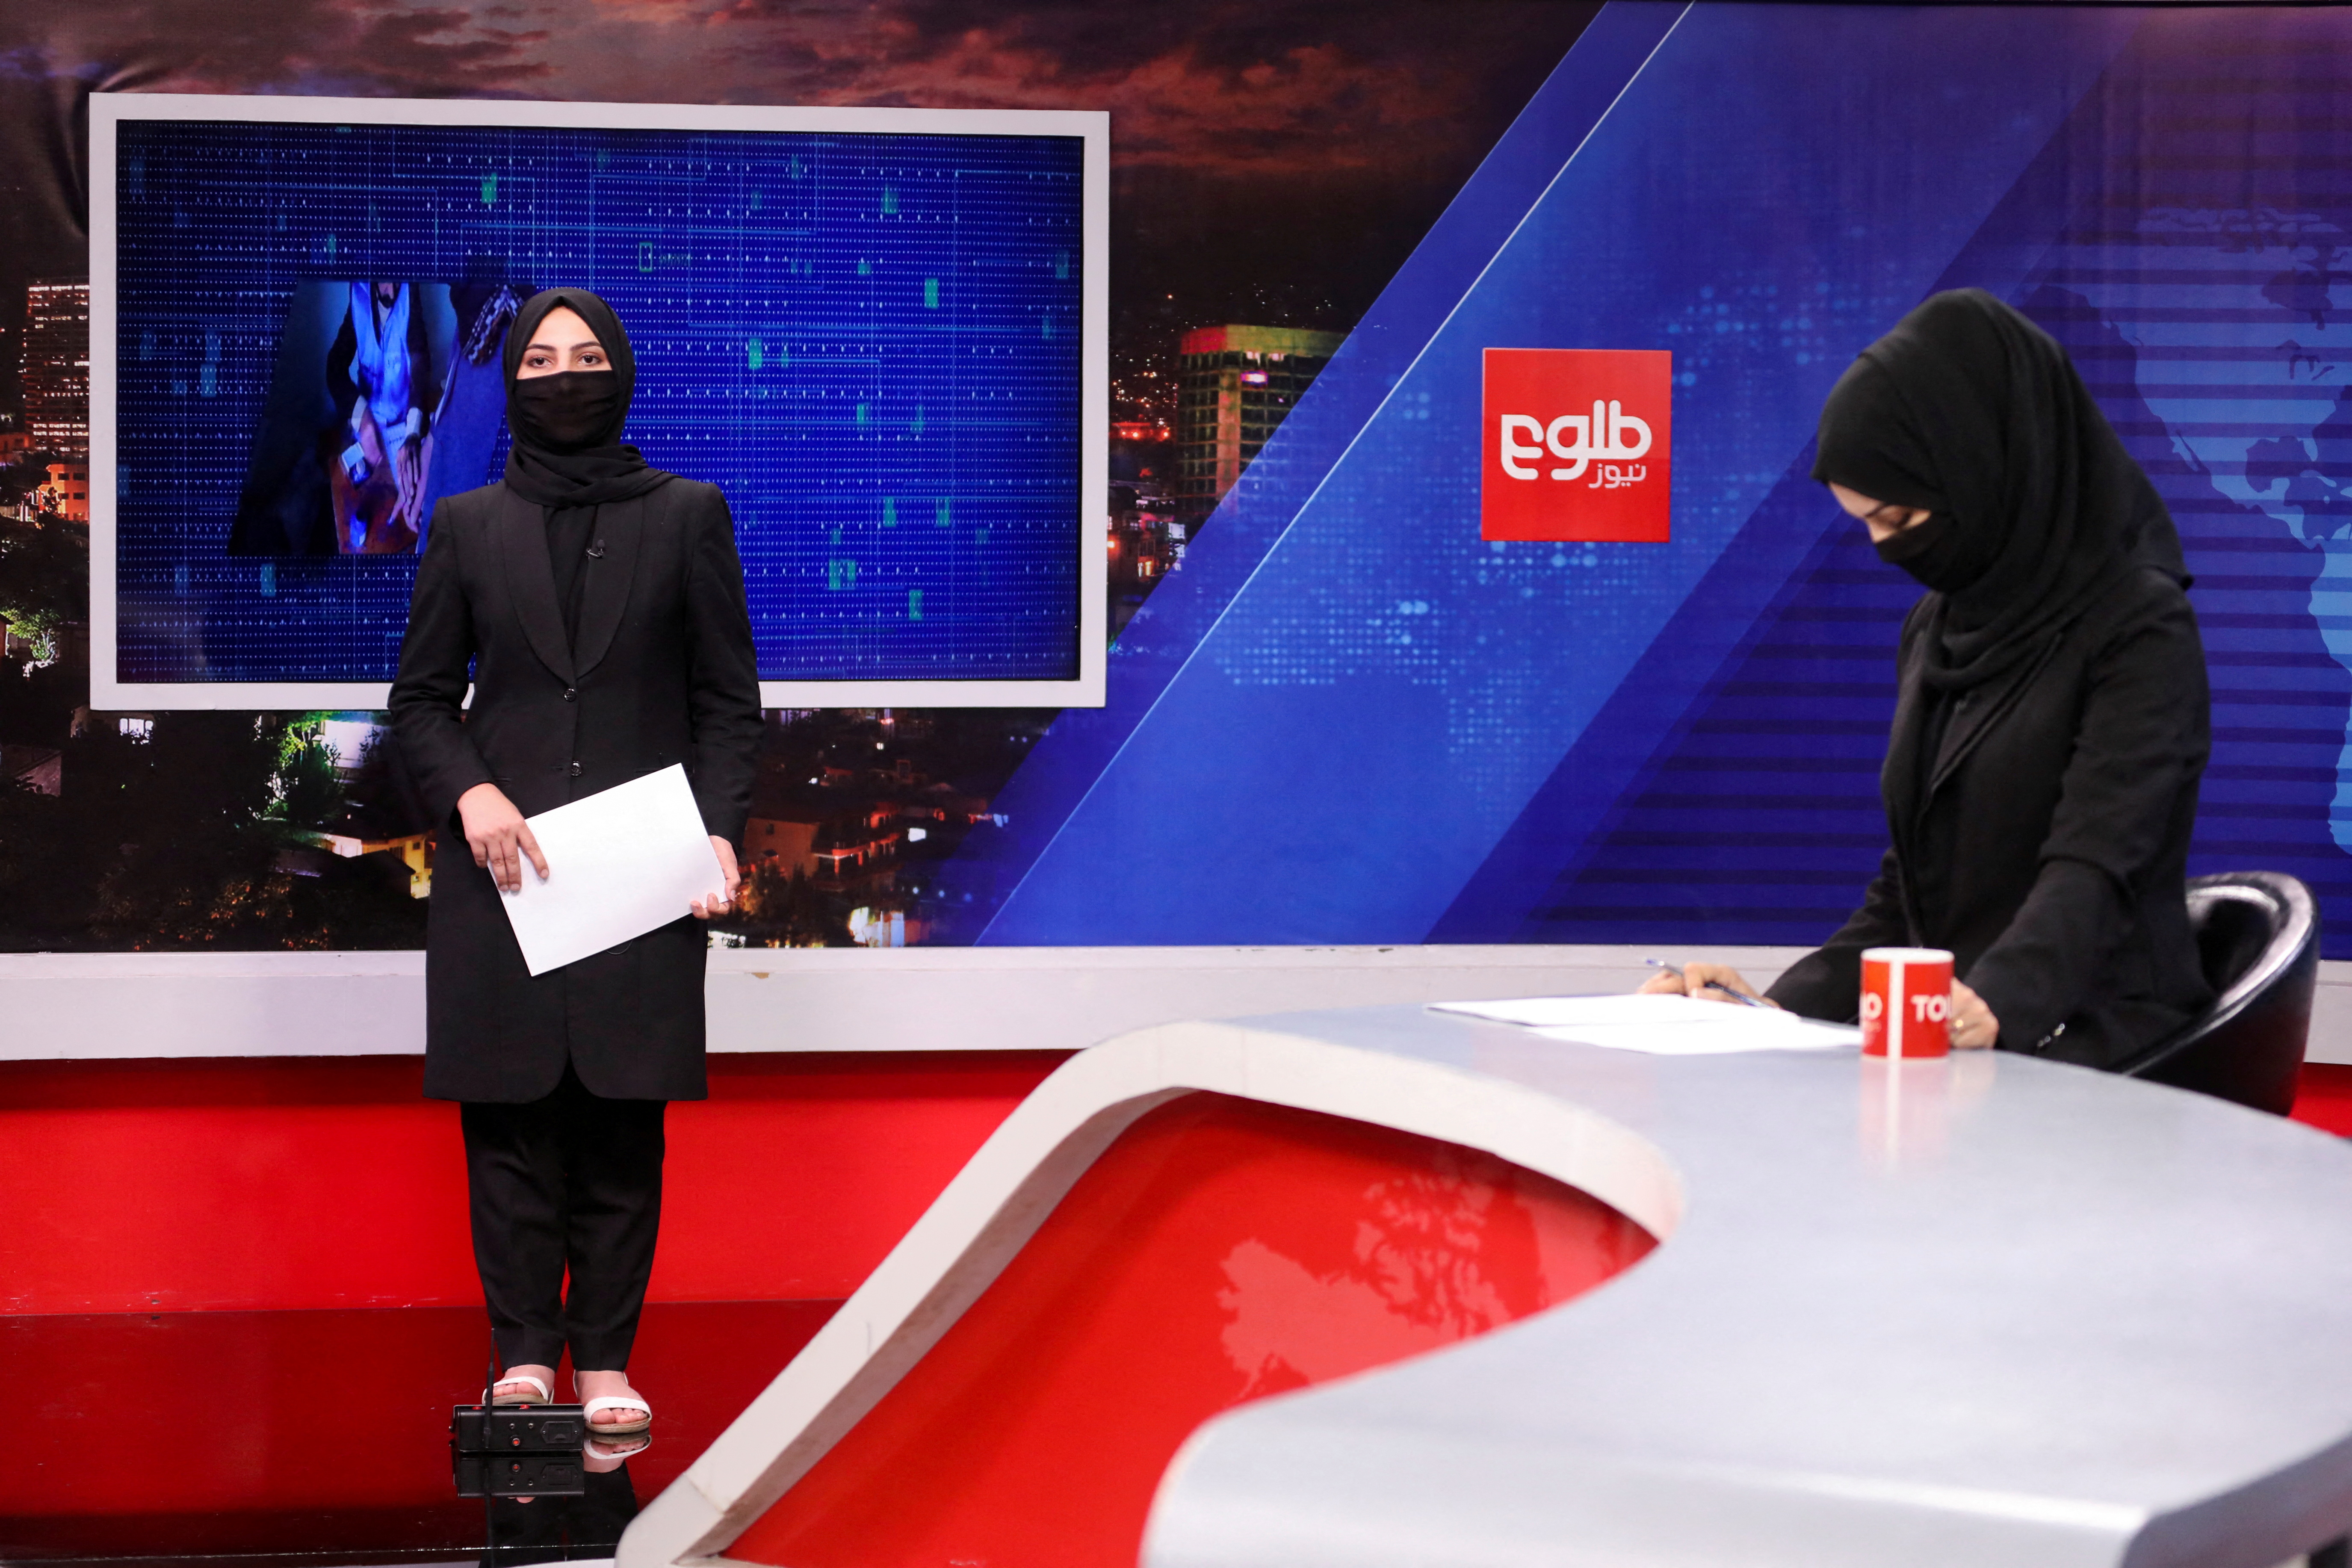 Female presenters for Tolo News, Sonia Niazi and Khatereh Ahmadi, while covering their face, work in a newsroom at Tolo TV station in Kabul